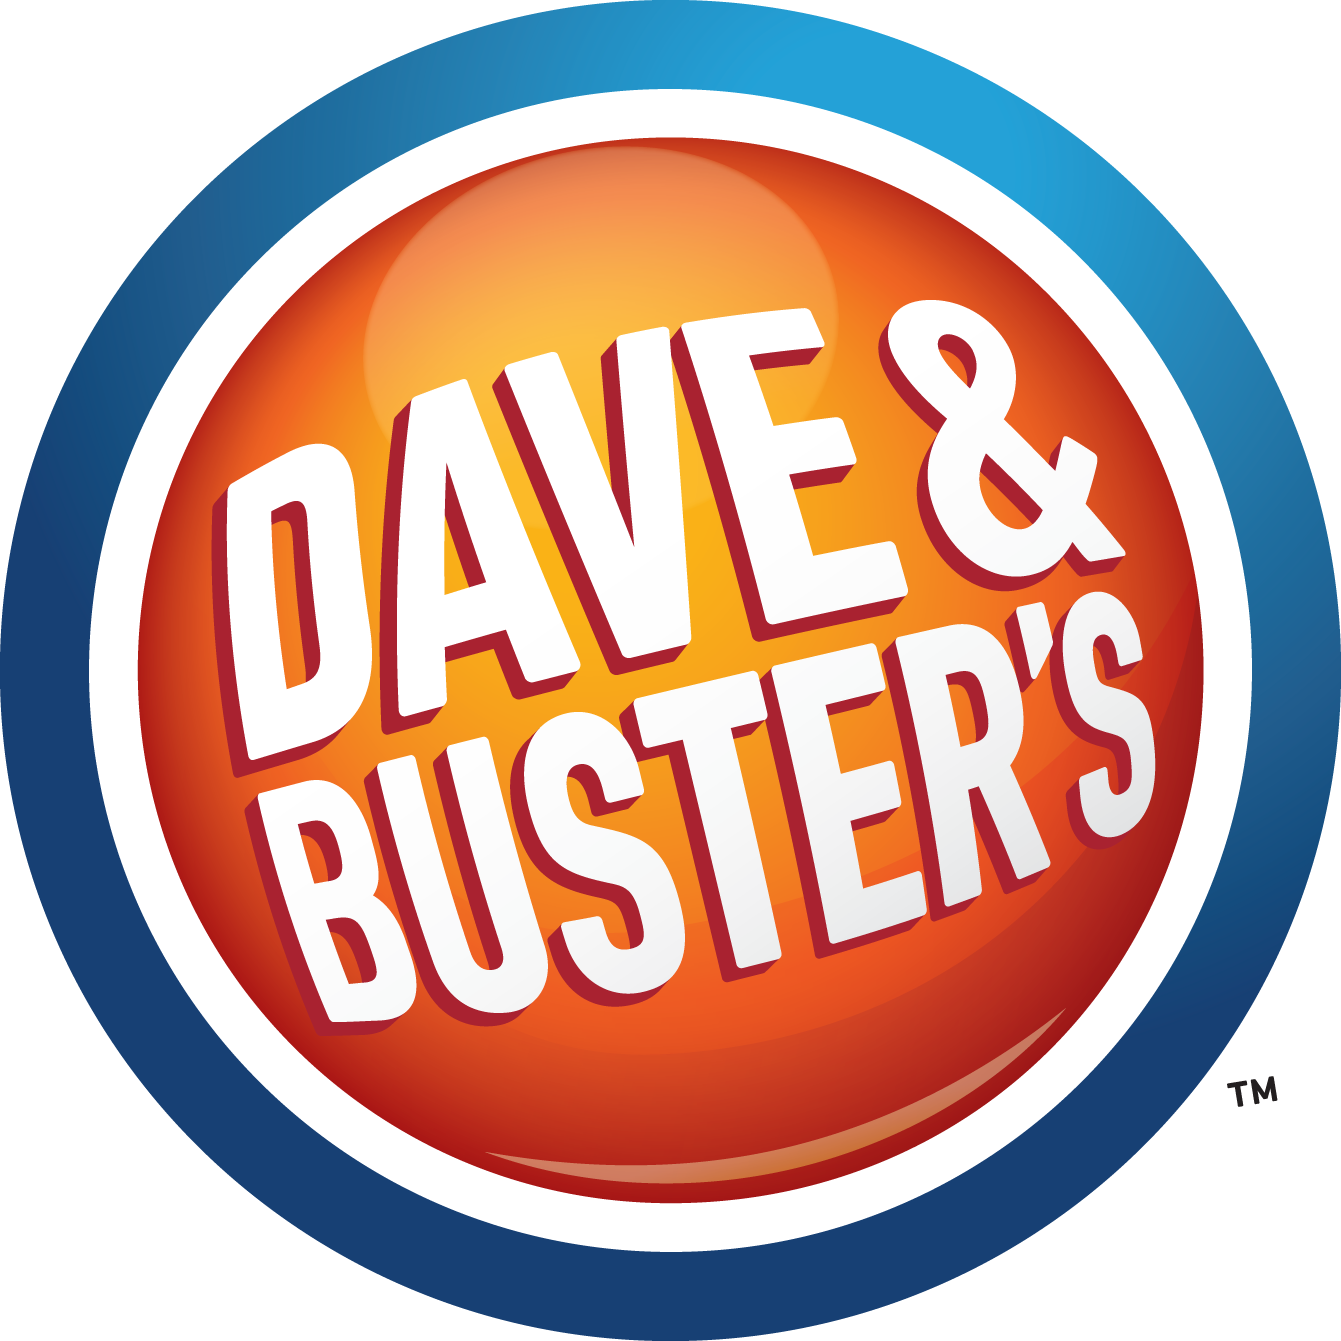 2018 Dave Busters Logo